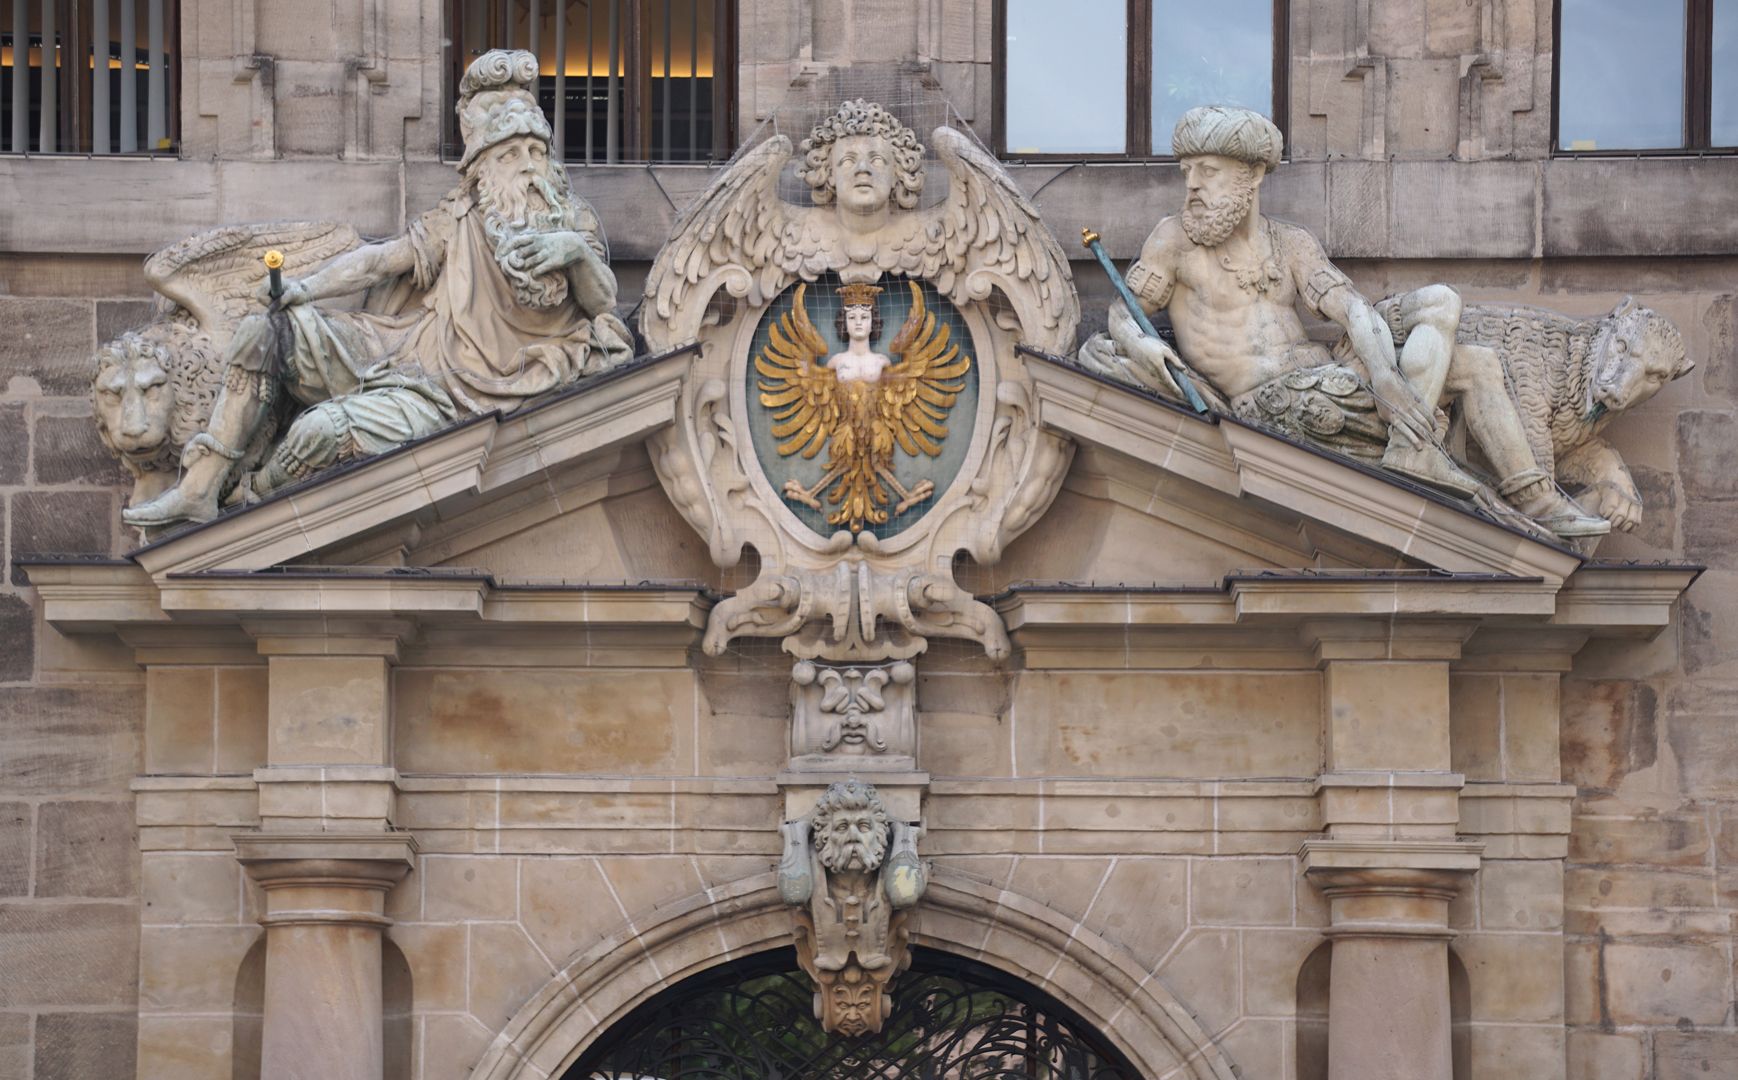 North portal Ninus and Cyrus lean on the gable, in the middle a cartouche with the large town coat of arms